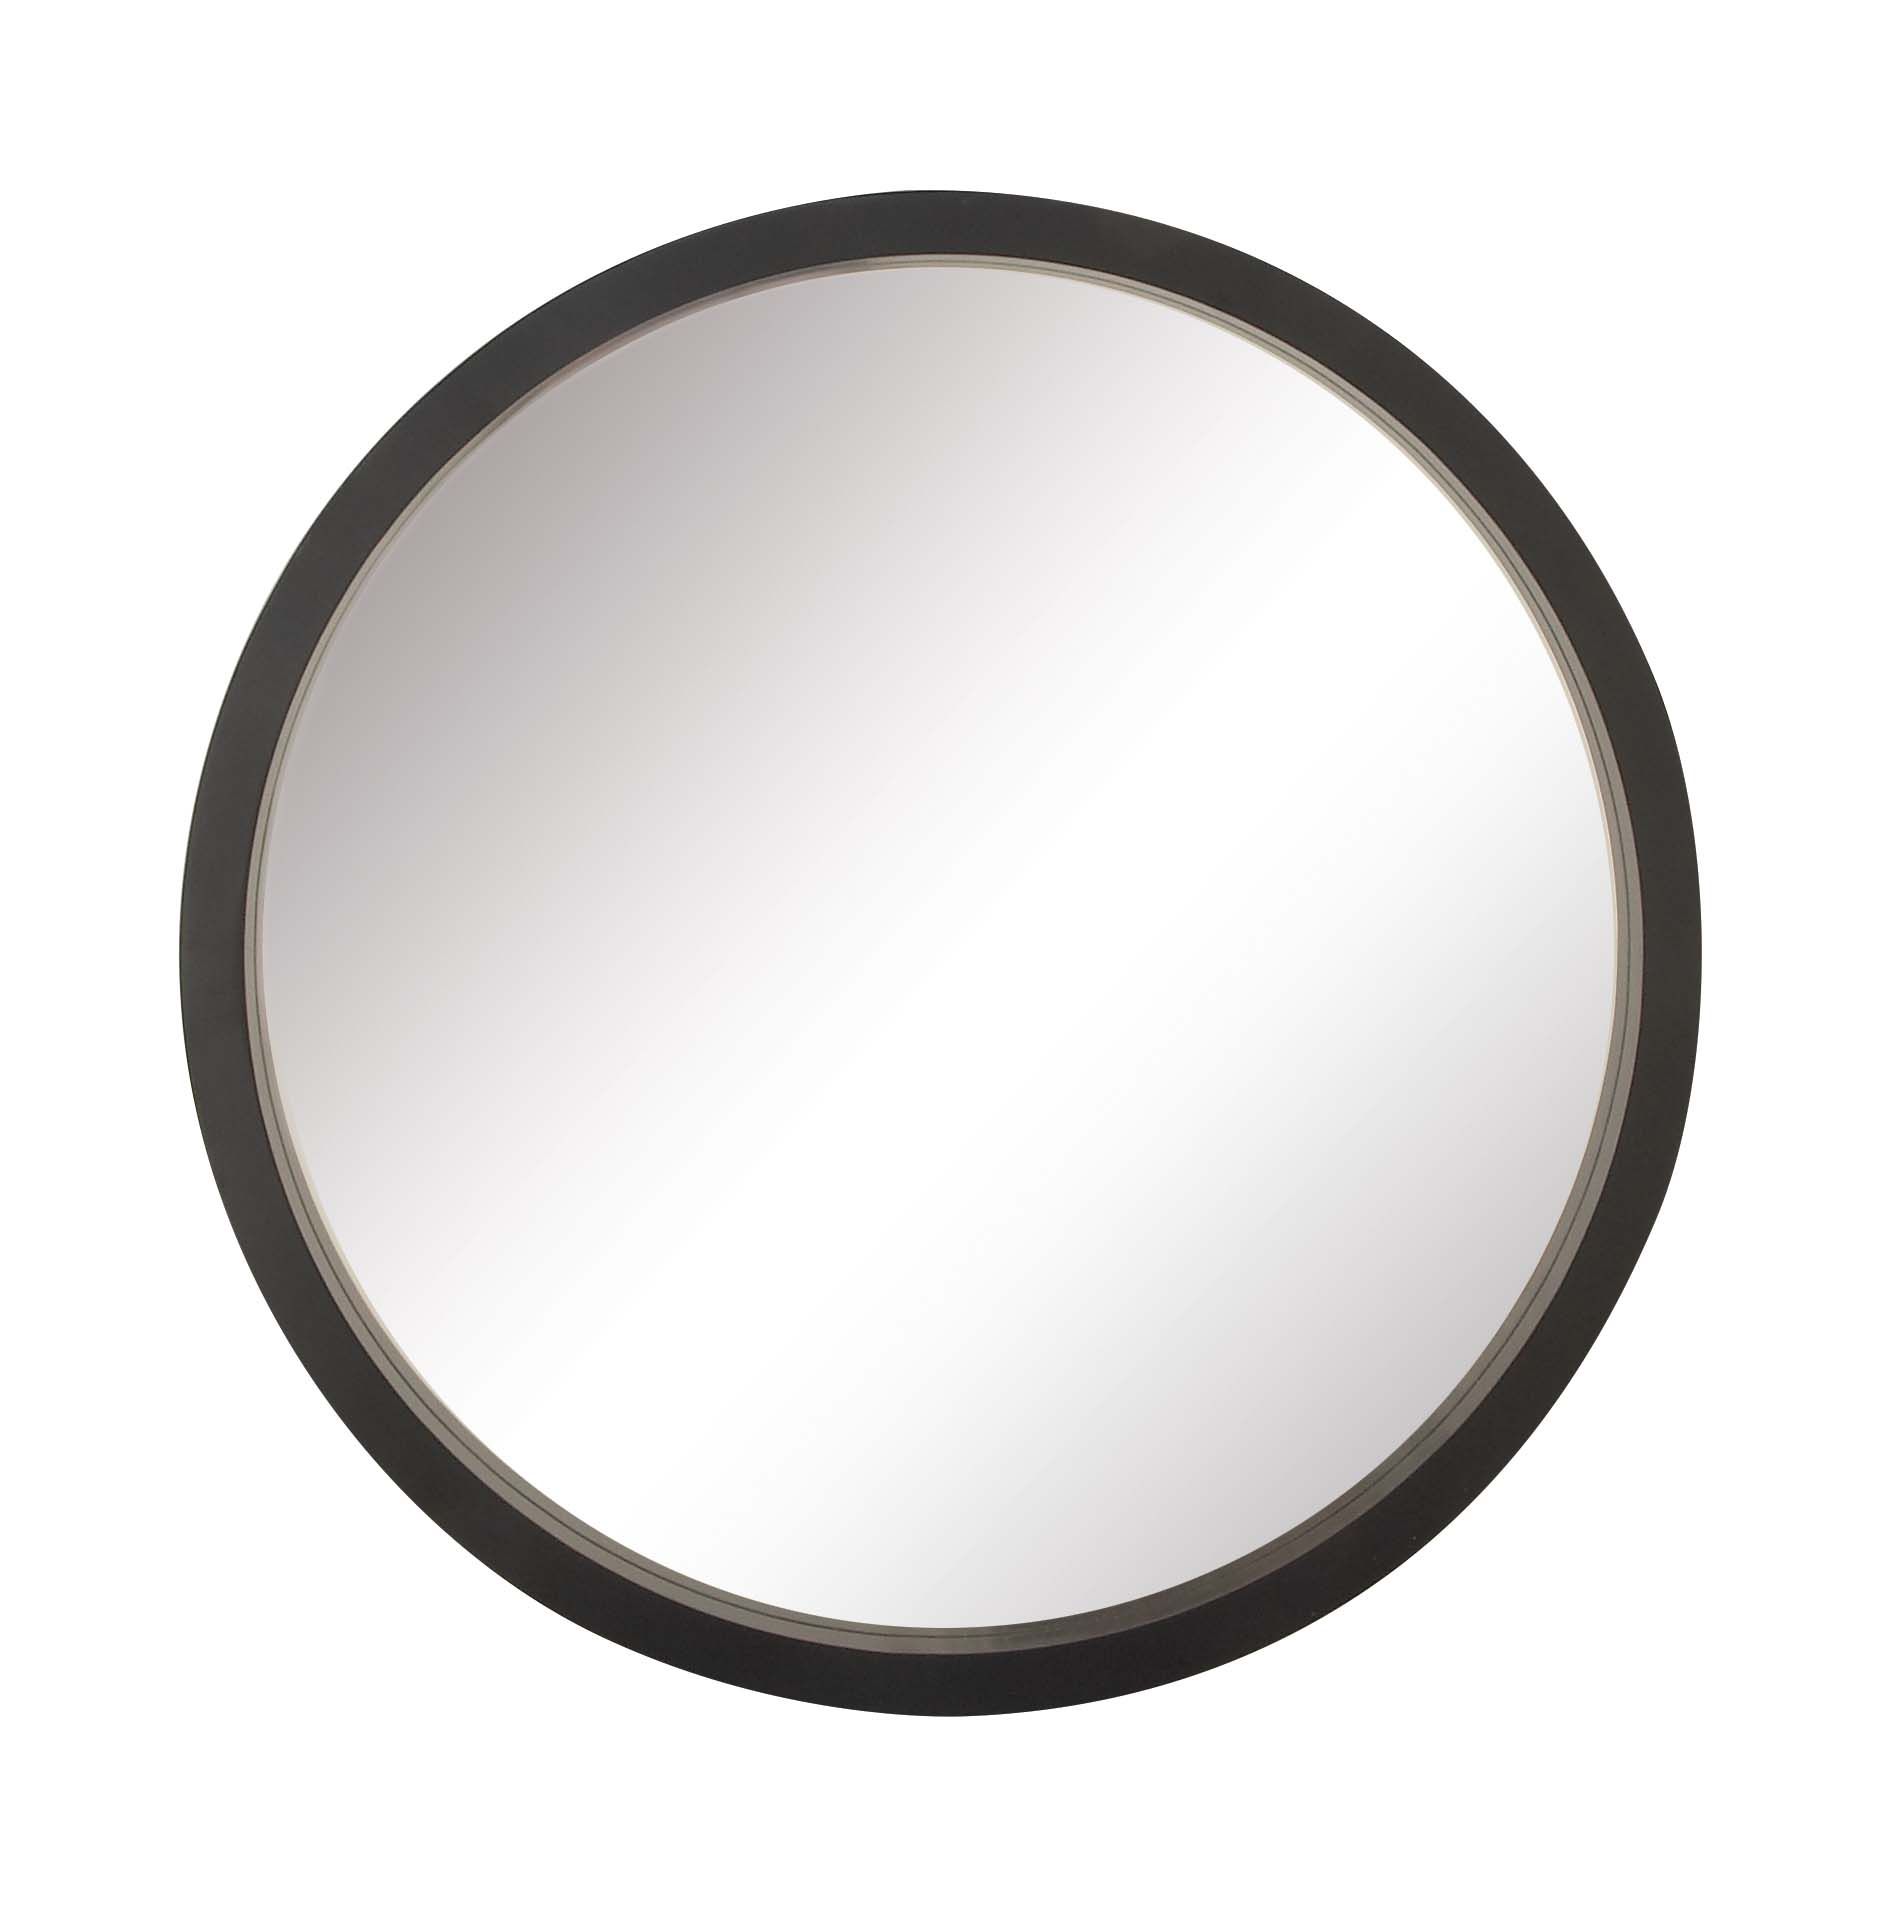 Decmode 32 Inch Contemporary Wooden Framed Round Wall Mirror, Black Within Round Stacked Wall Mirrors (View 11 of 15)